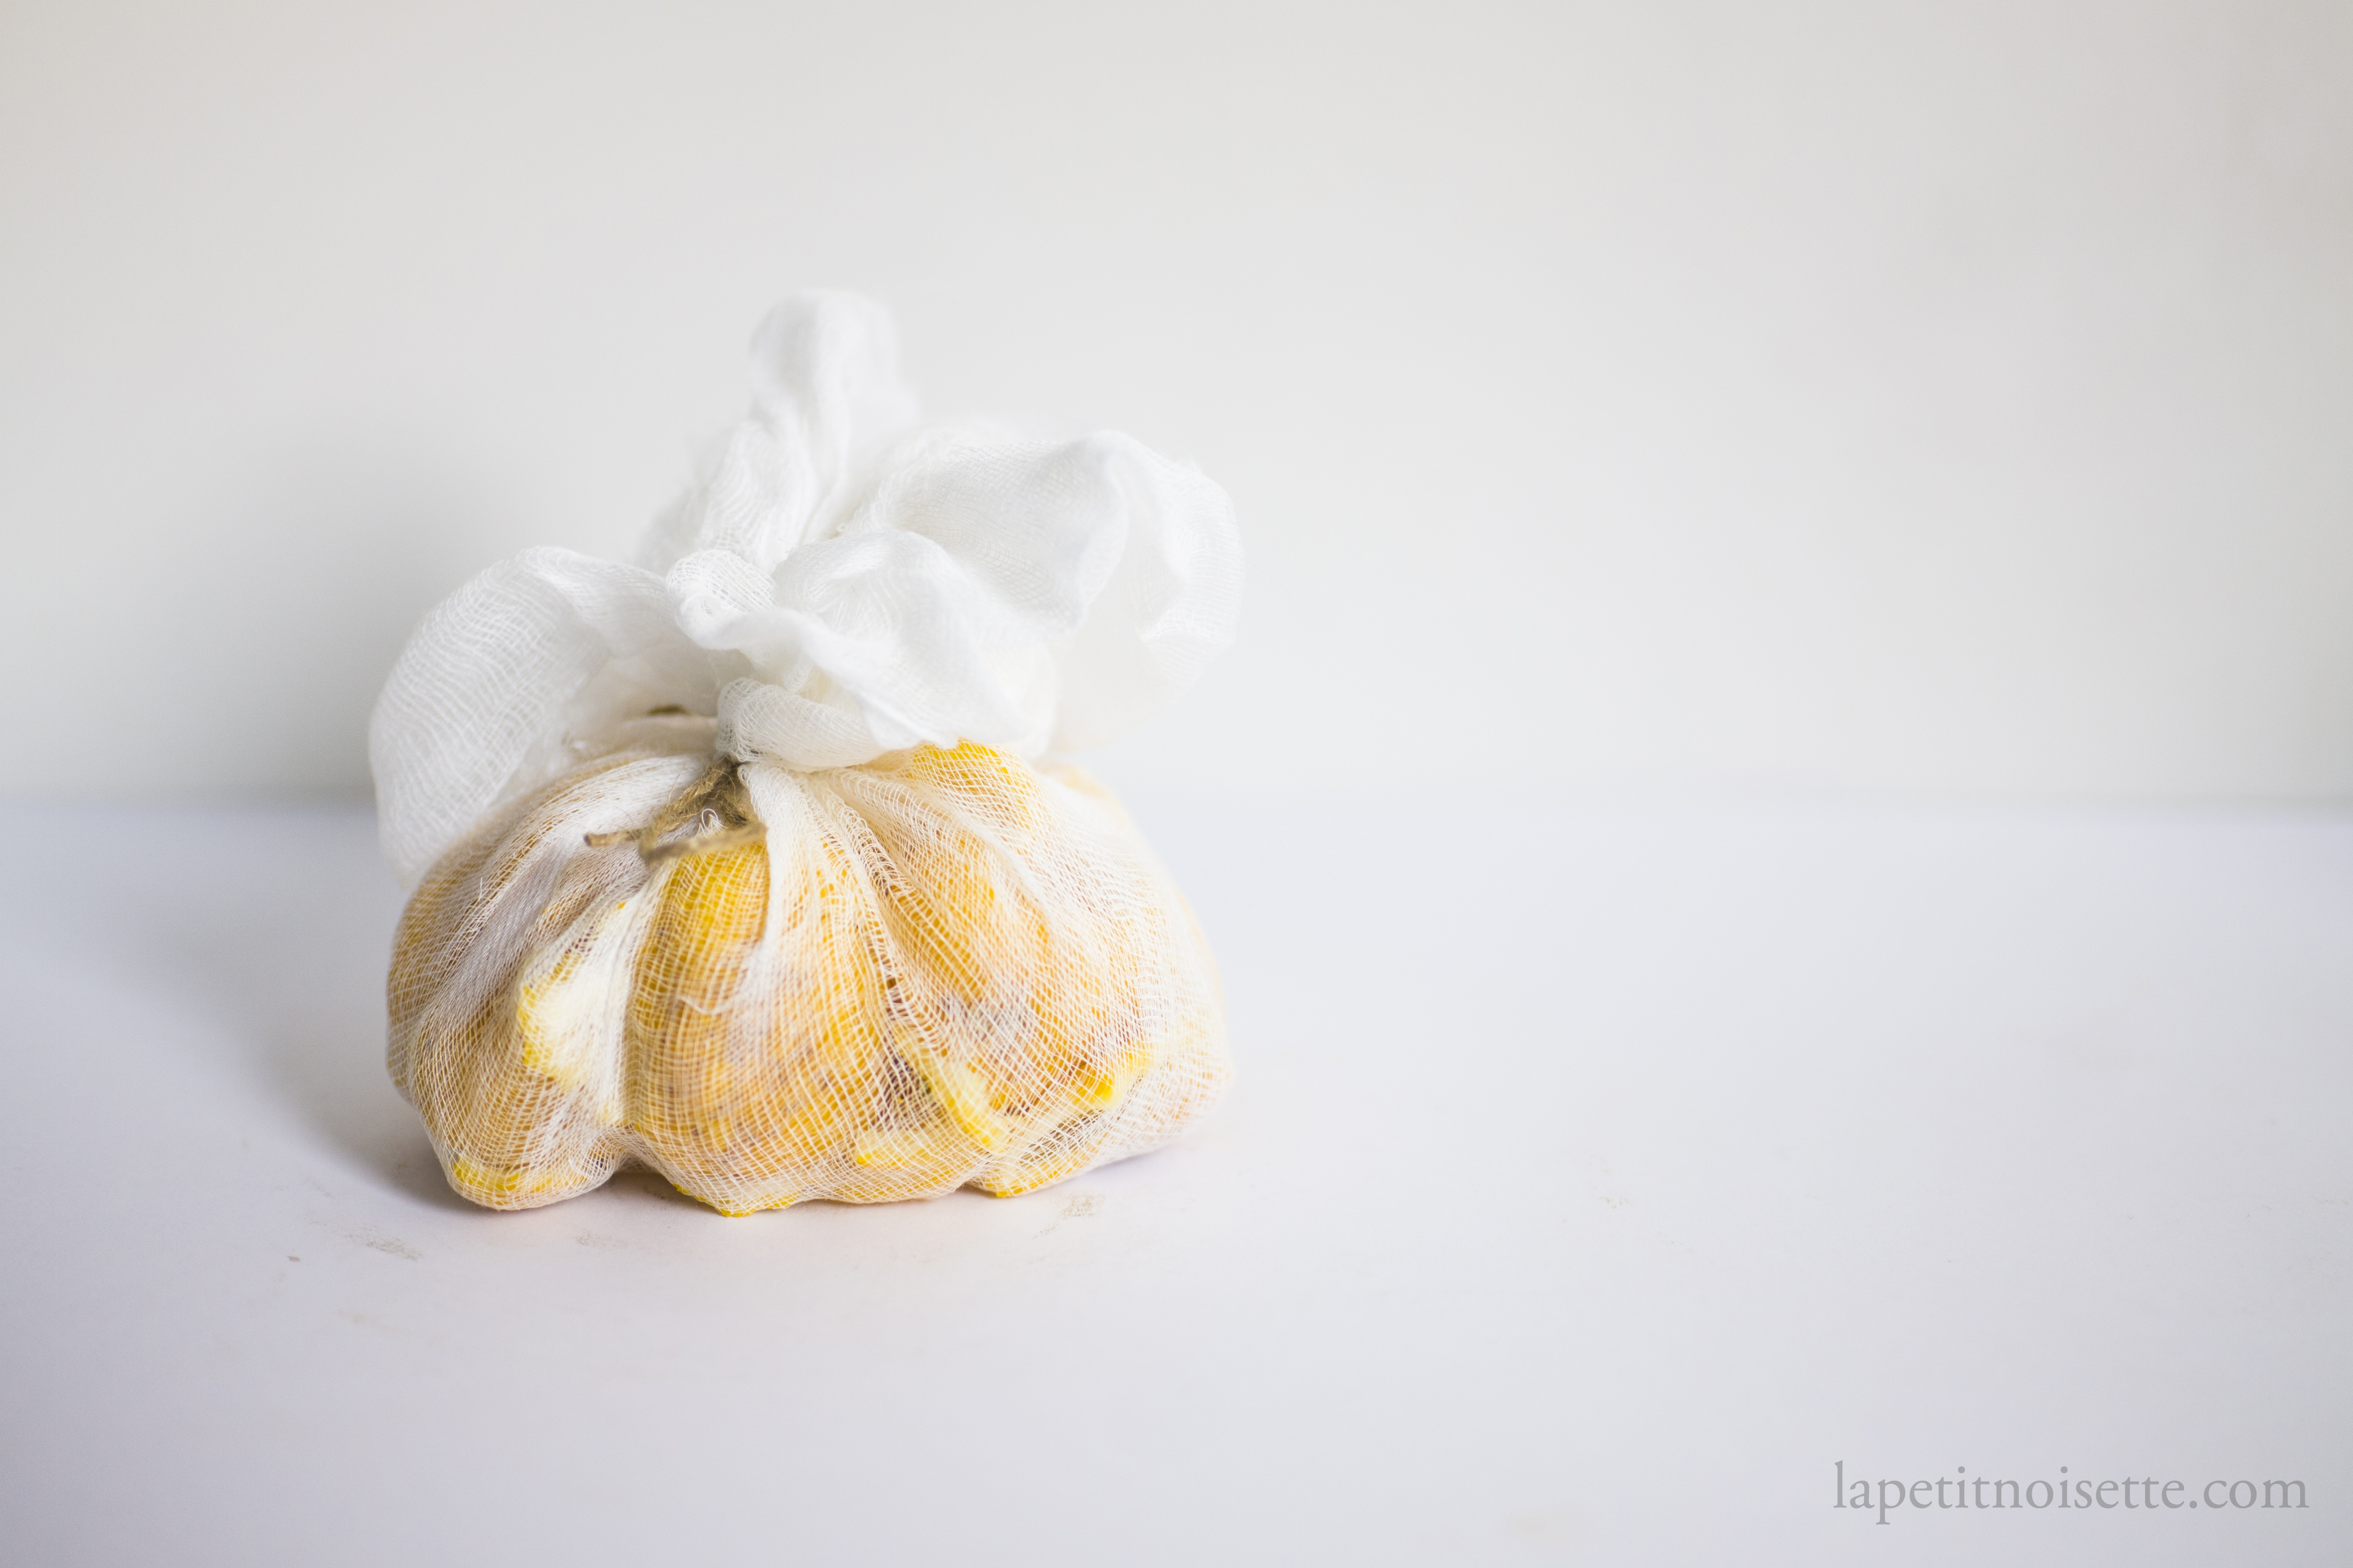 the yuzu peel tied in a muslin cloth bag to make it easier to remove after steeping in alcohol.